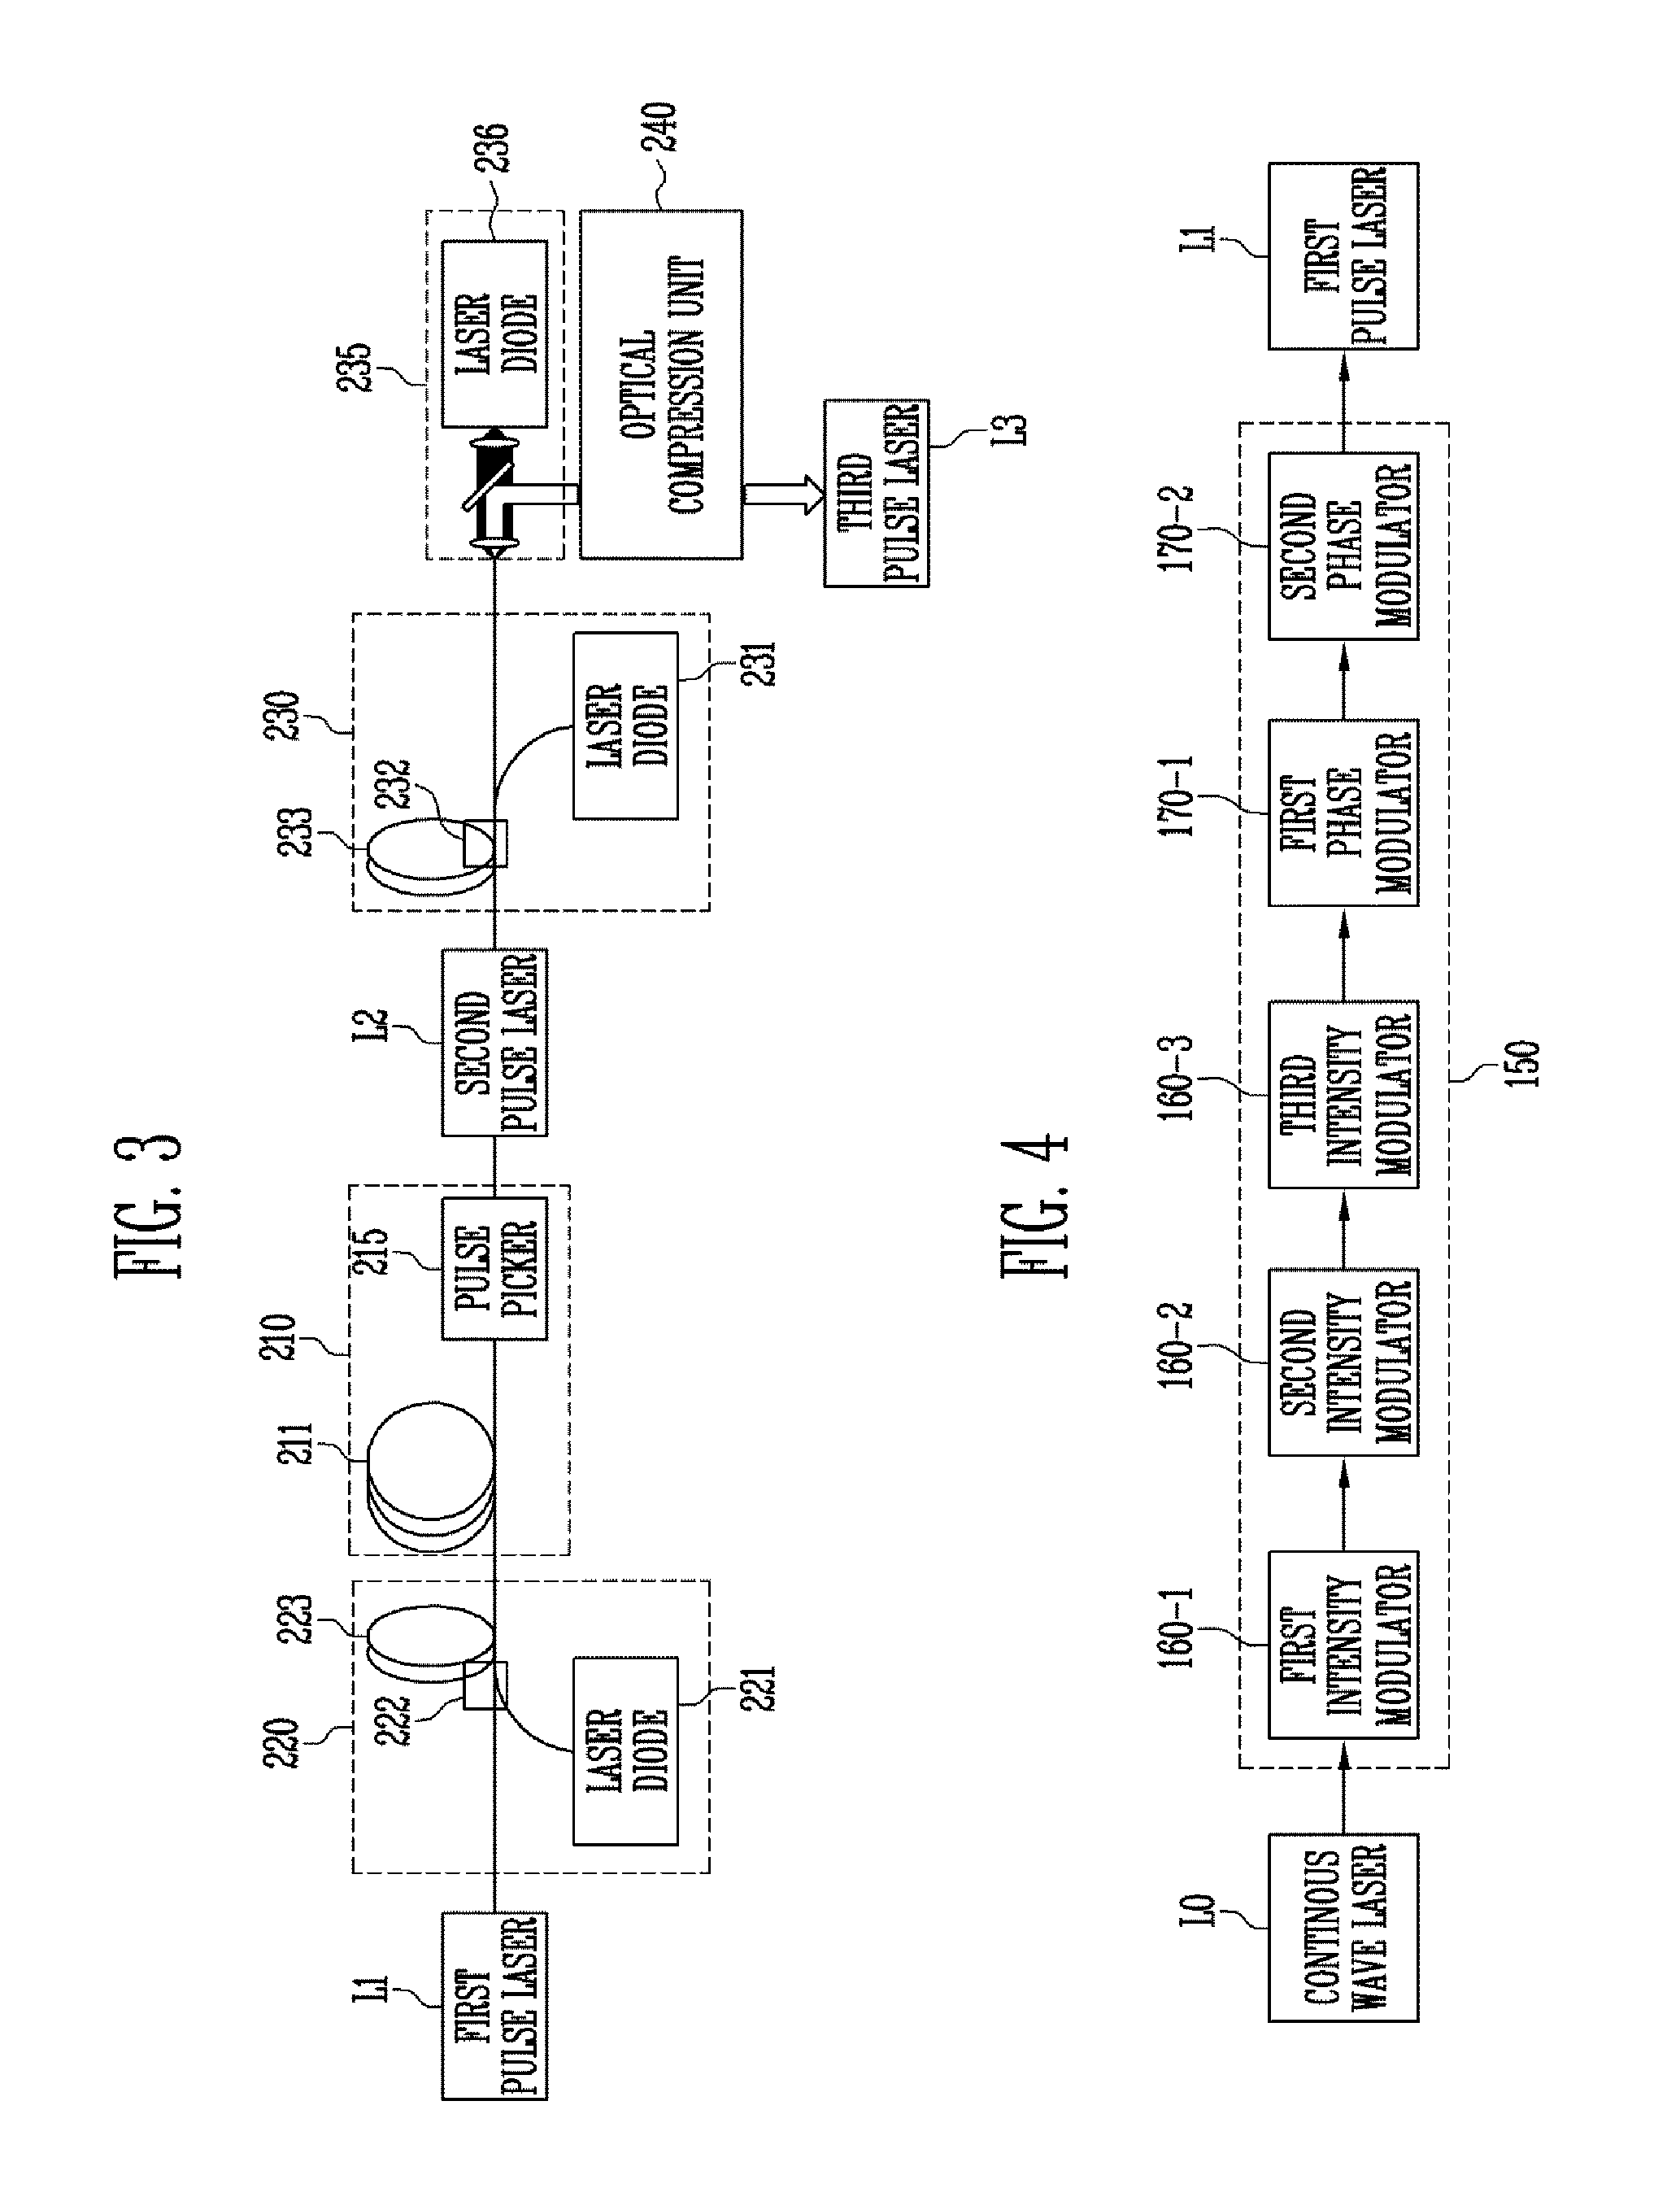 Apparatus and method for generating pulse laser